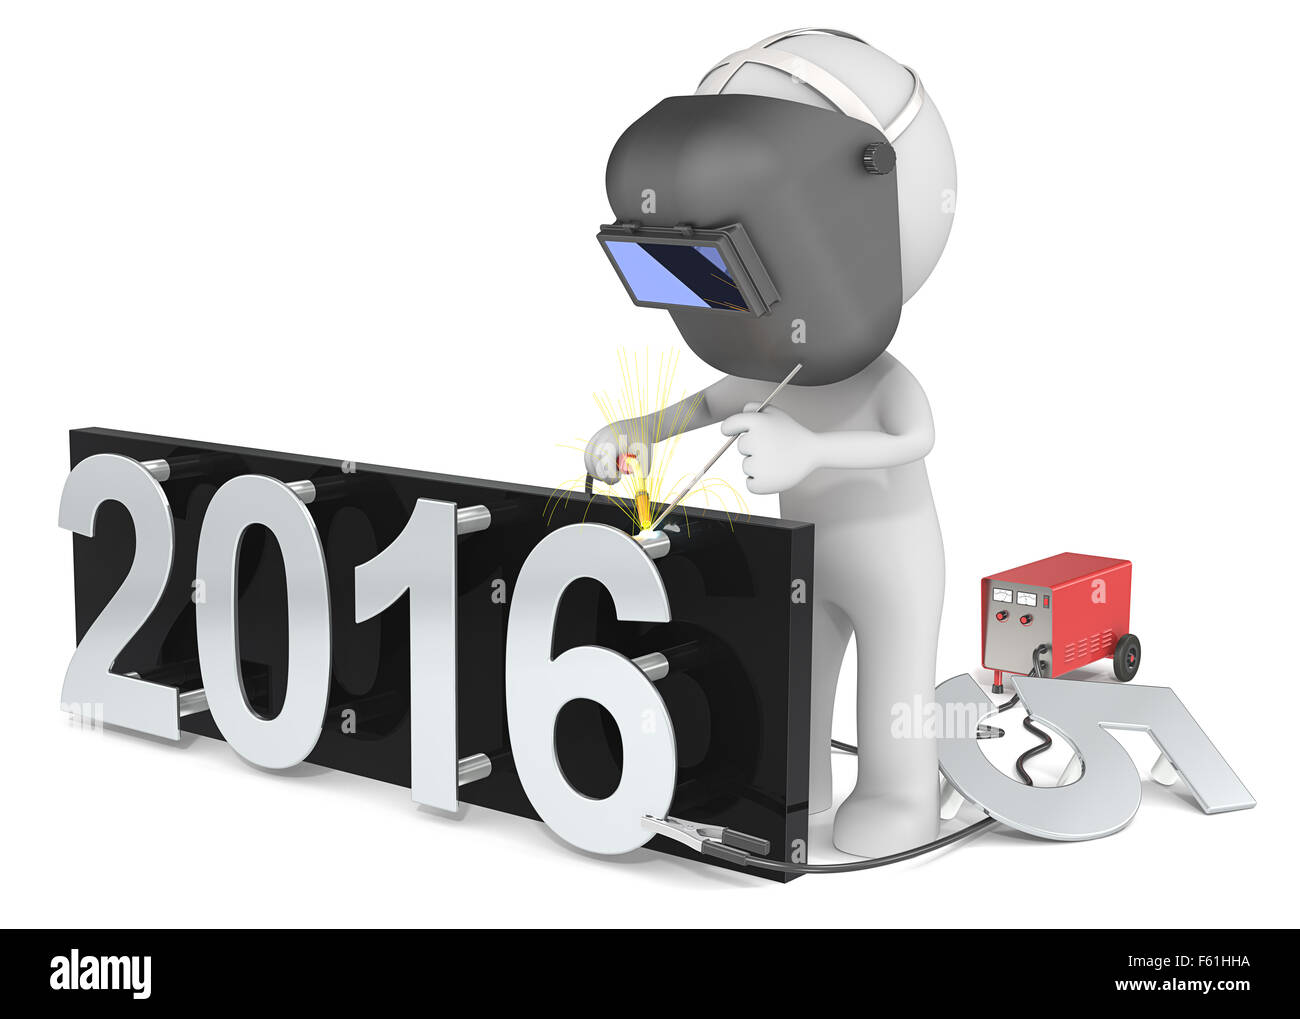 Dude 3D character The Welder changing number on New Year from 2015 to 2016. Stock Photo